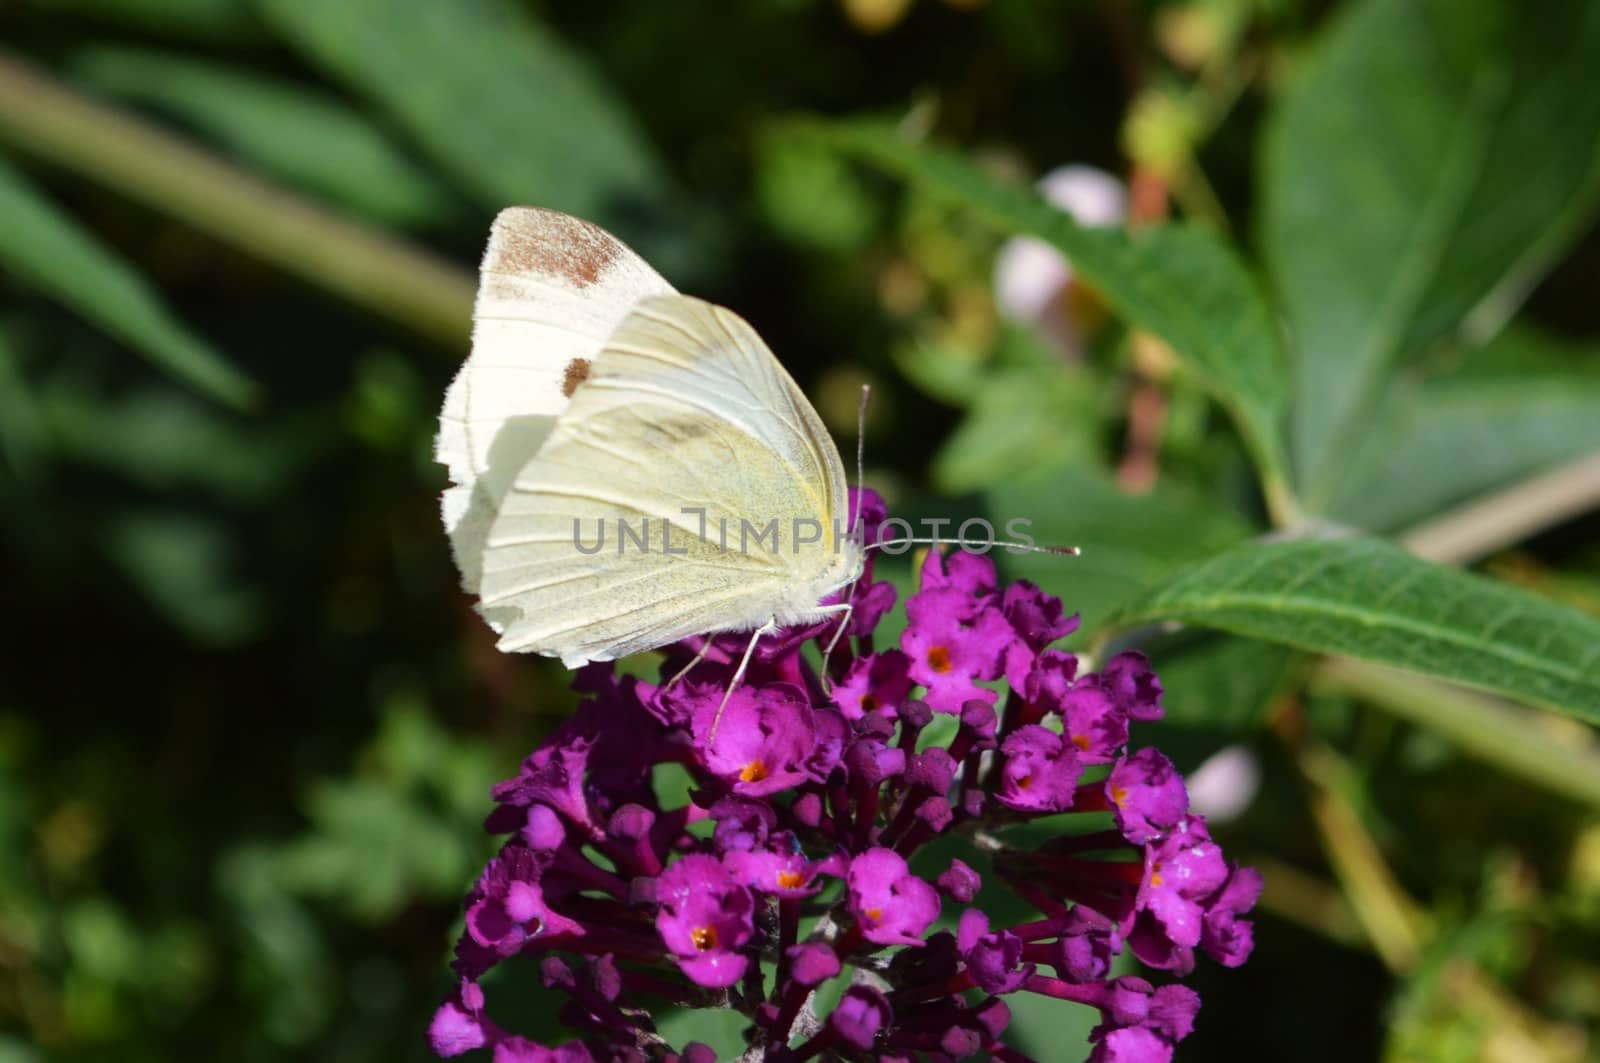 Close-up image of a Large white Butterfly visiting a Buddleia flower.